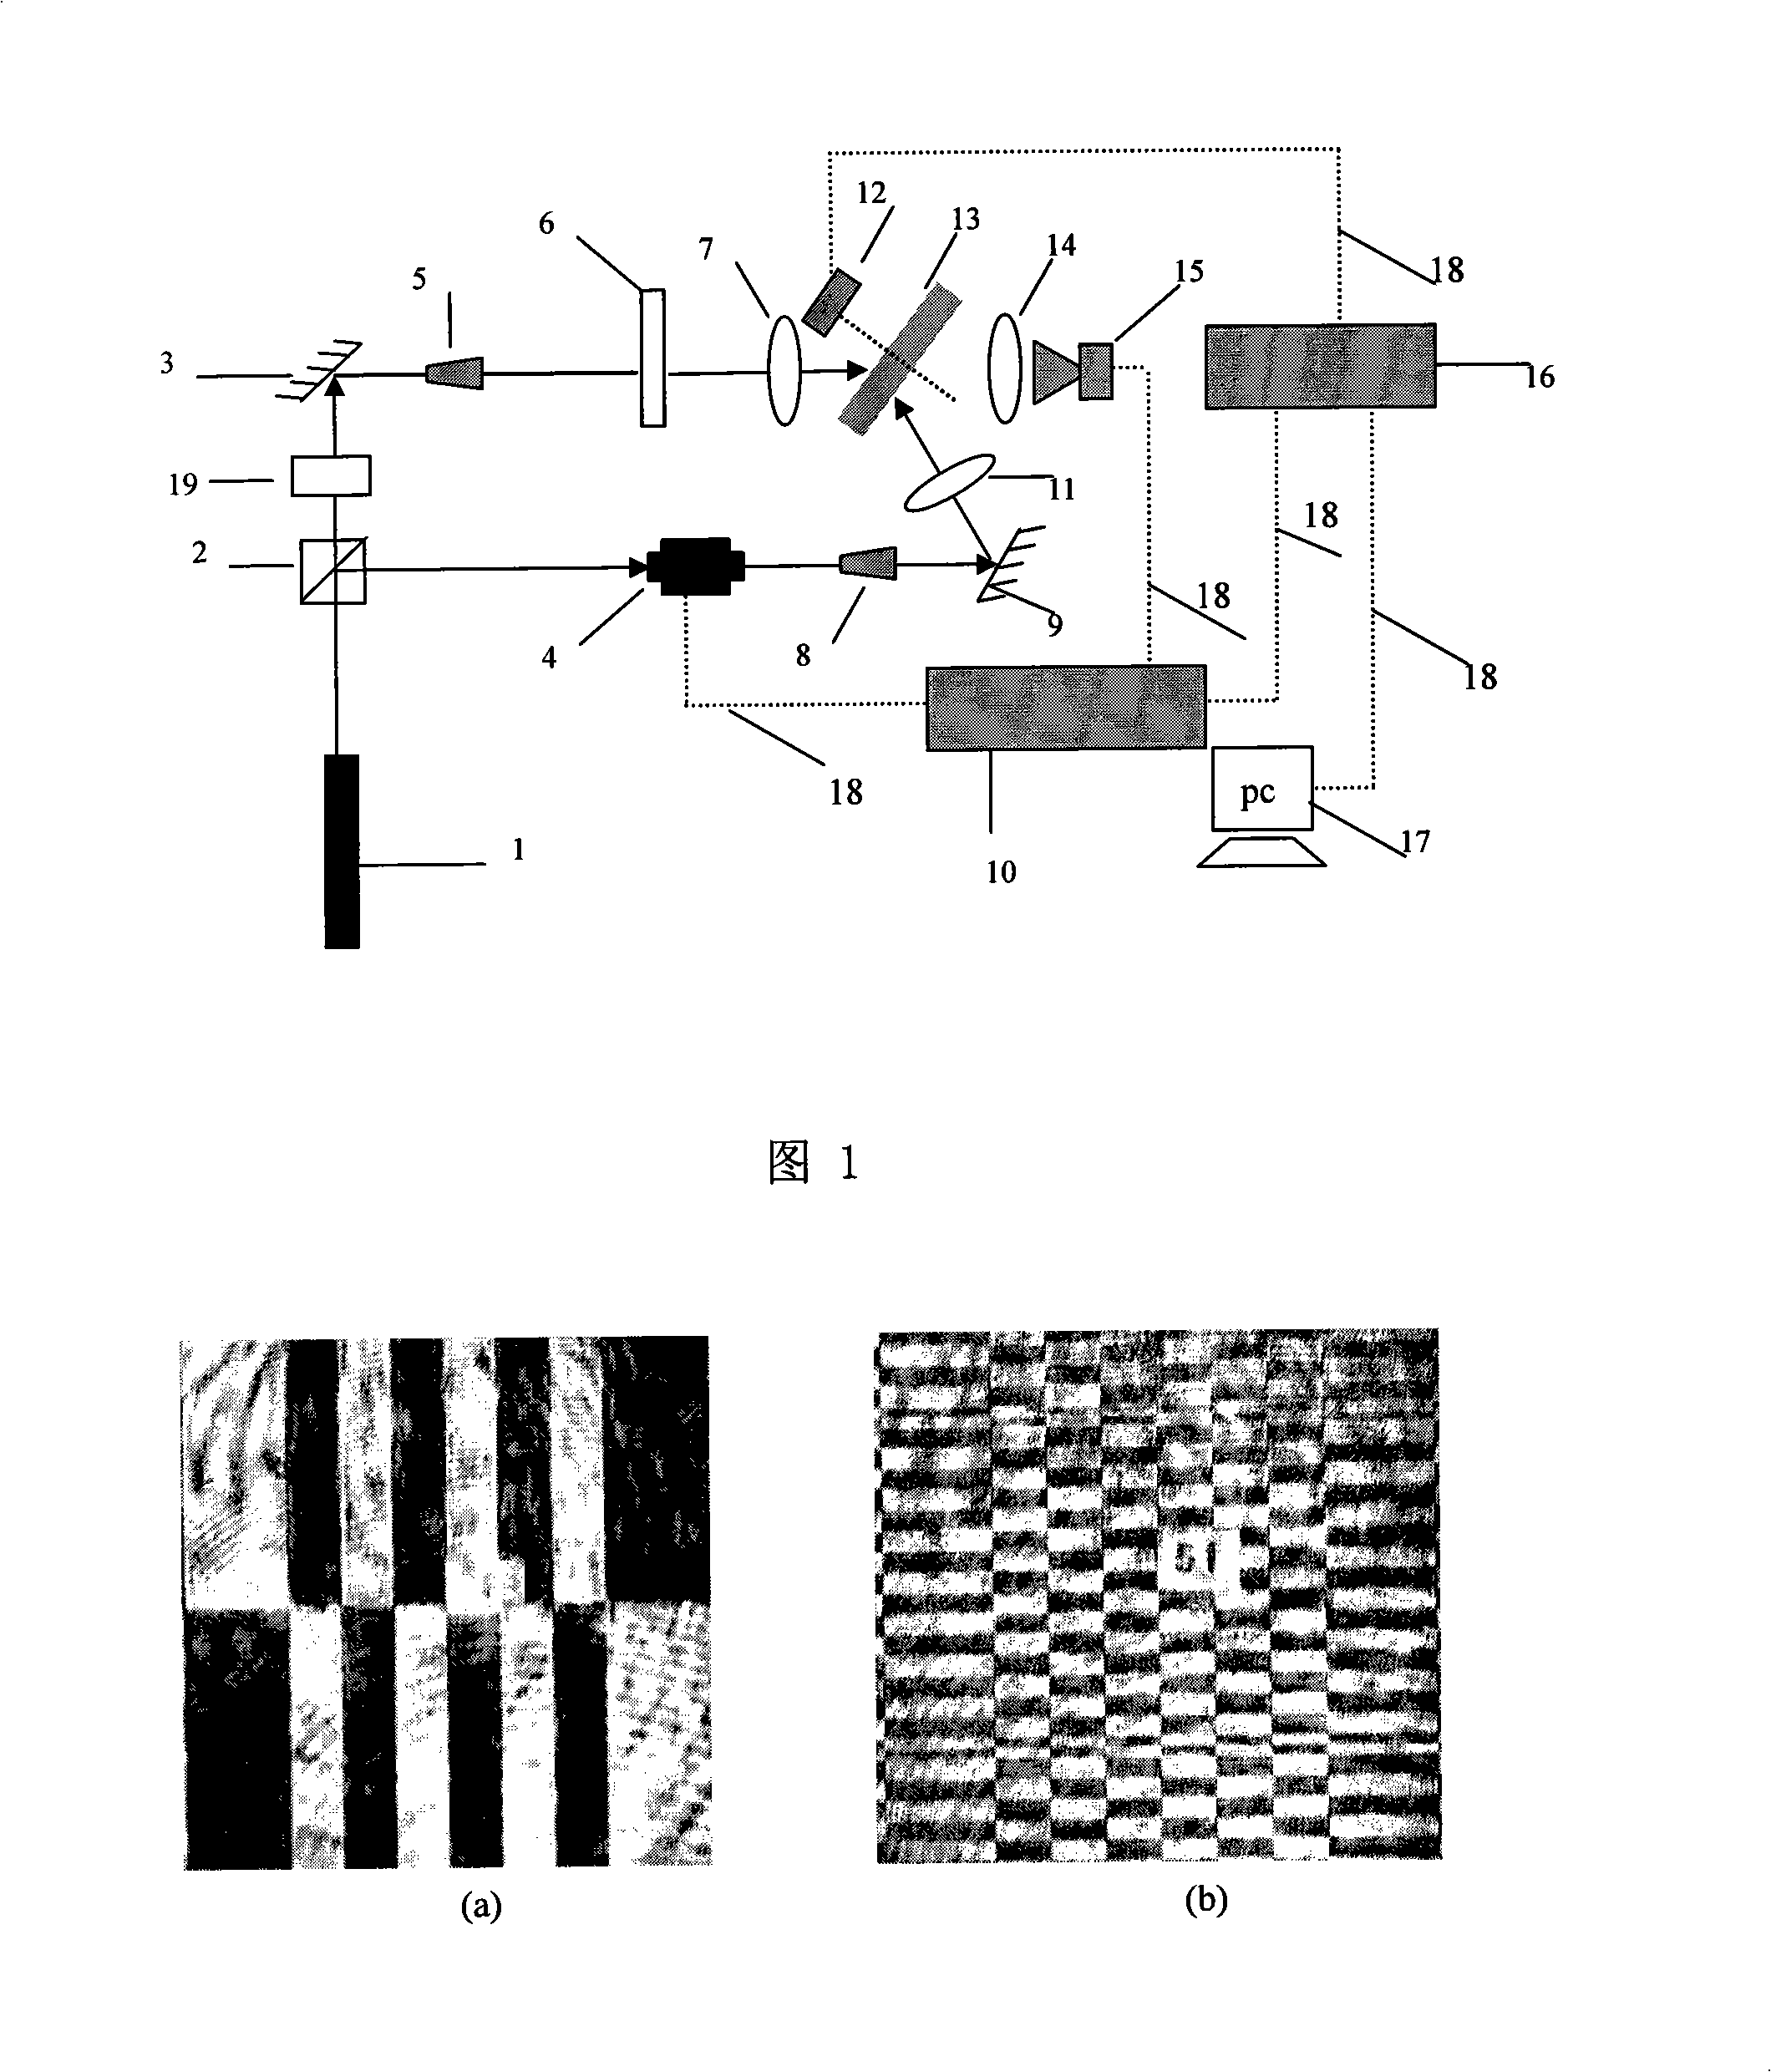 Rapid reading out system and method of holographic data storage